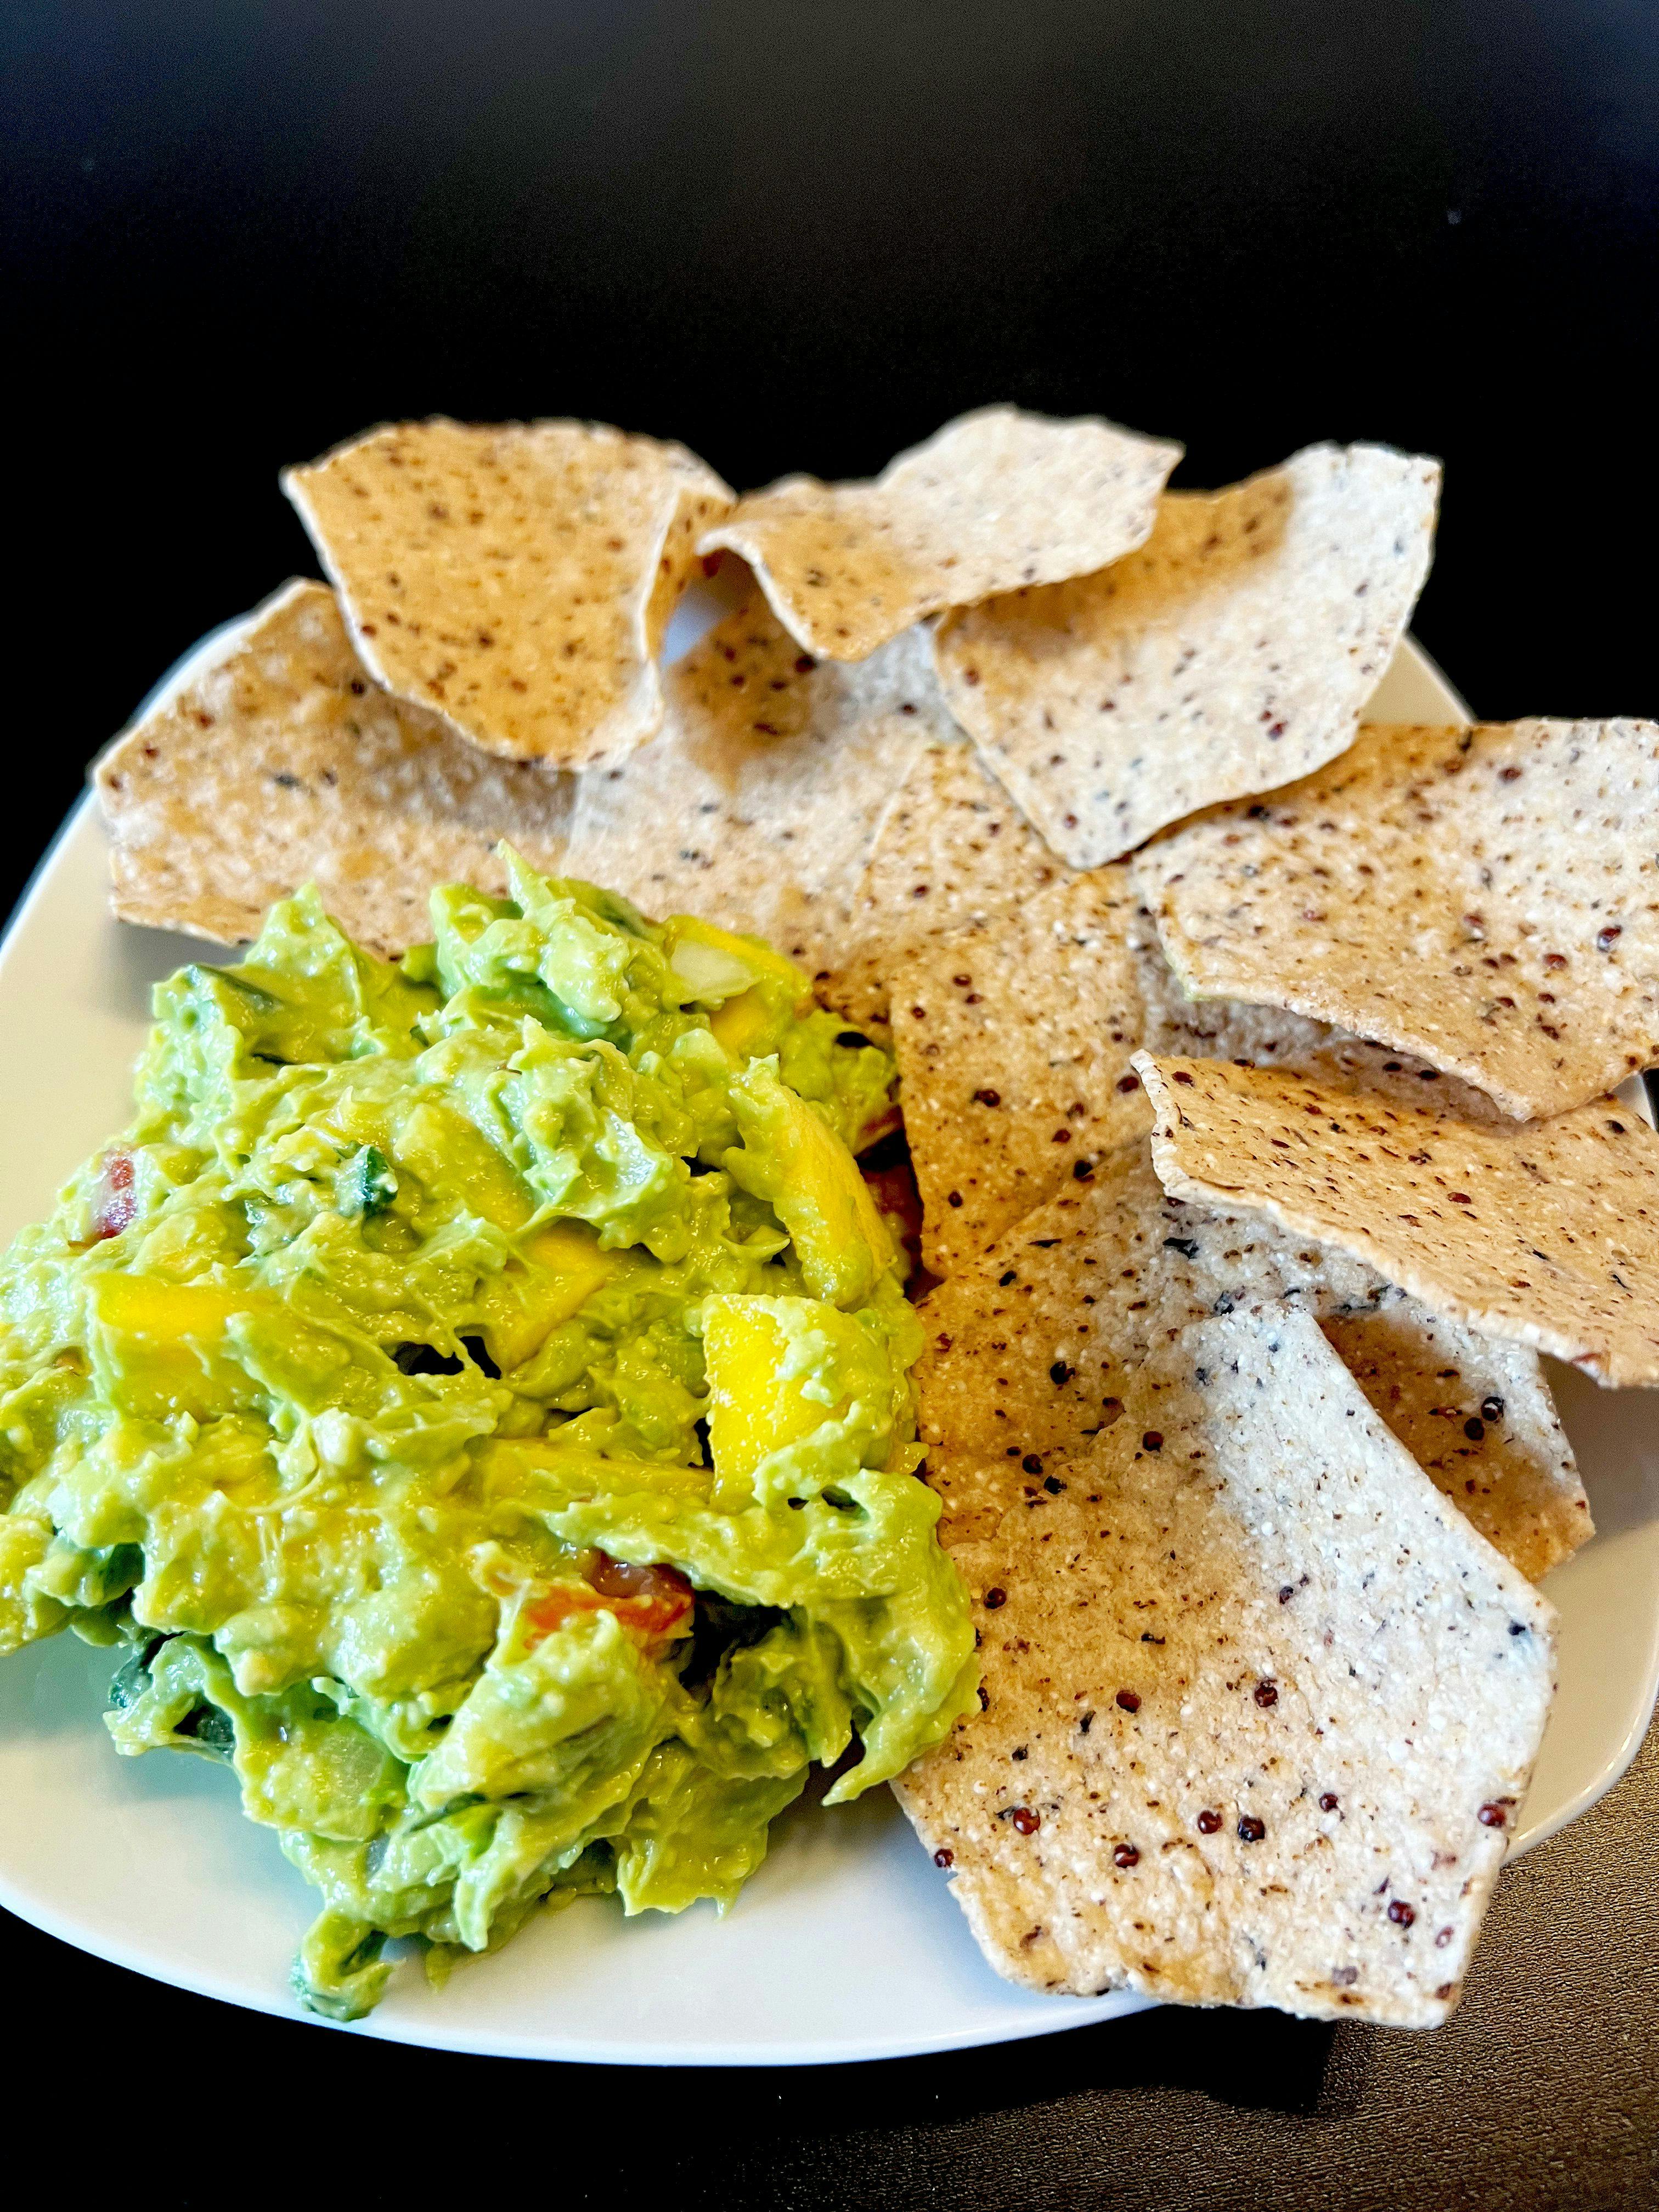 Guacamole is always a favorite dip for chips, but try it on top of salads and burrito bowls.